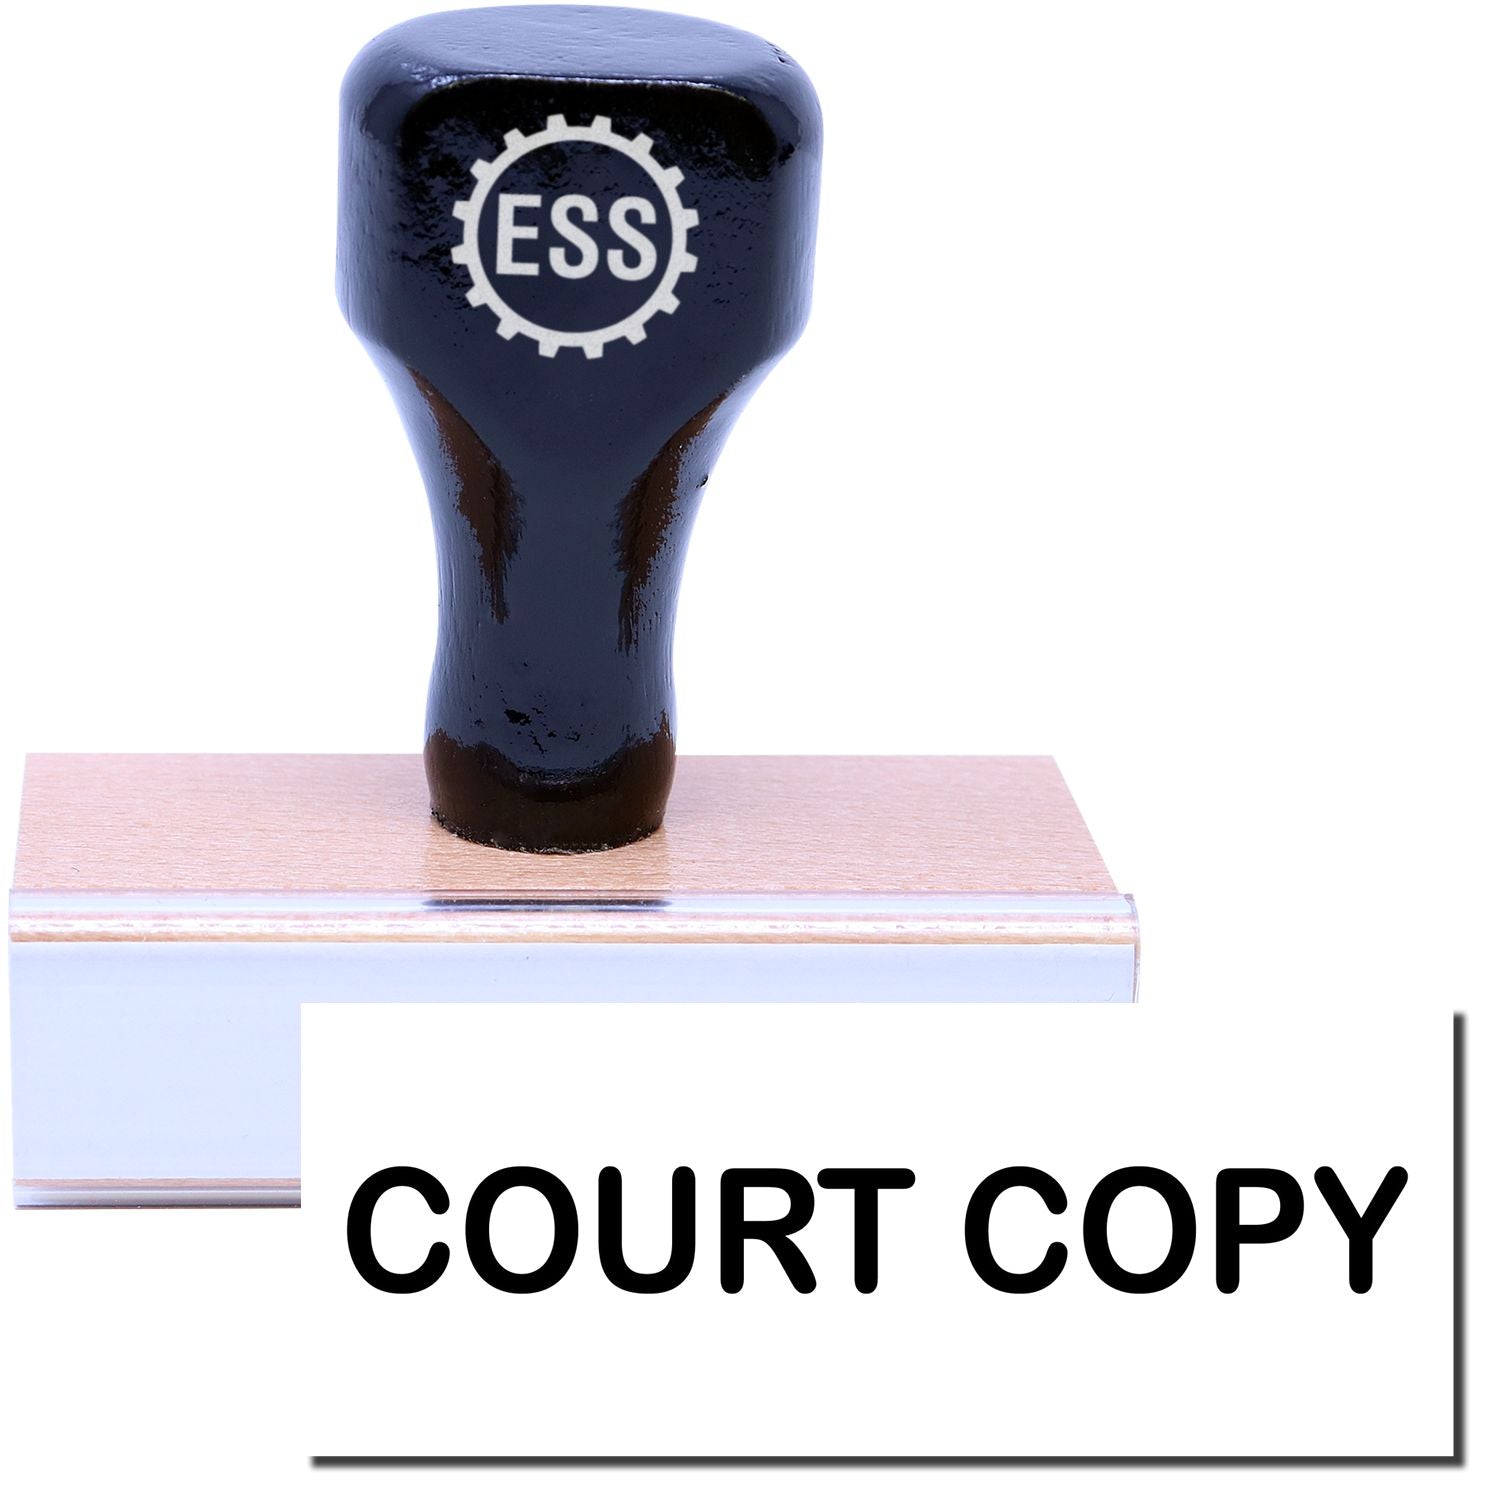 A stock office legal rubber stamp with a stamped image showing how the text "COURT COPY" is displayed after stamping.